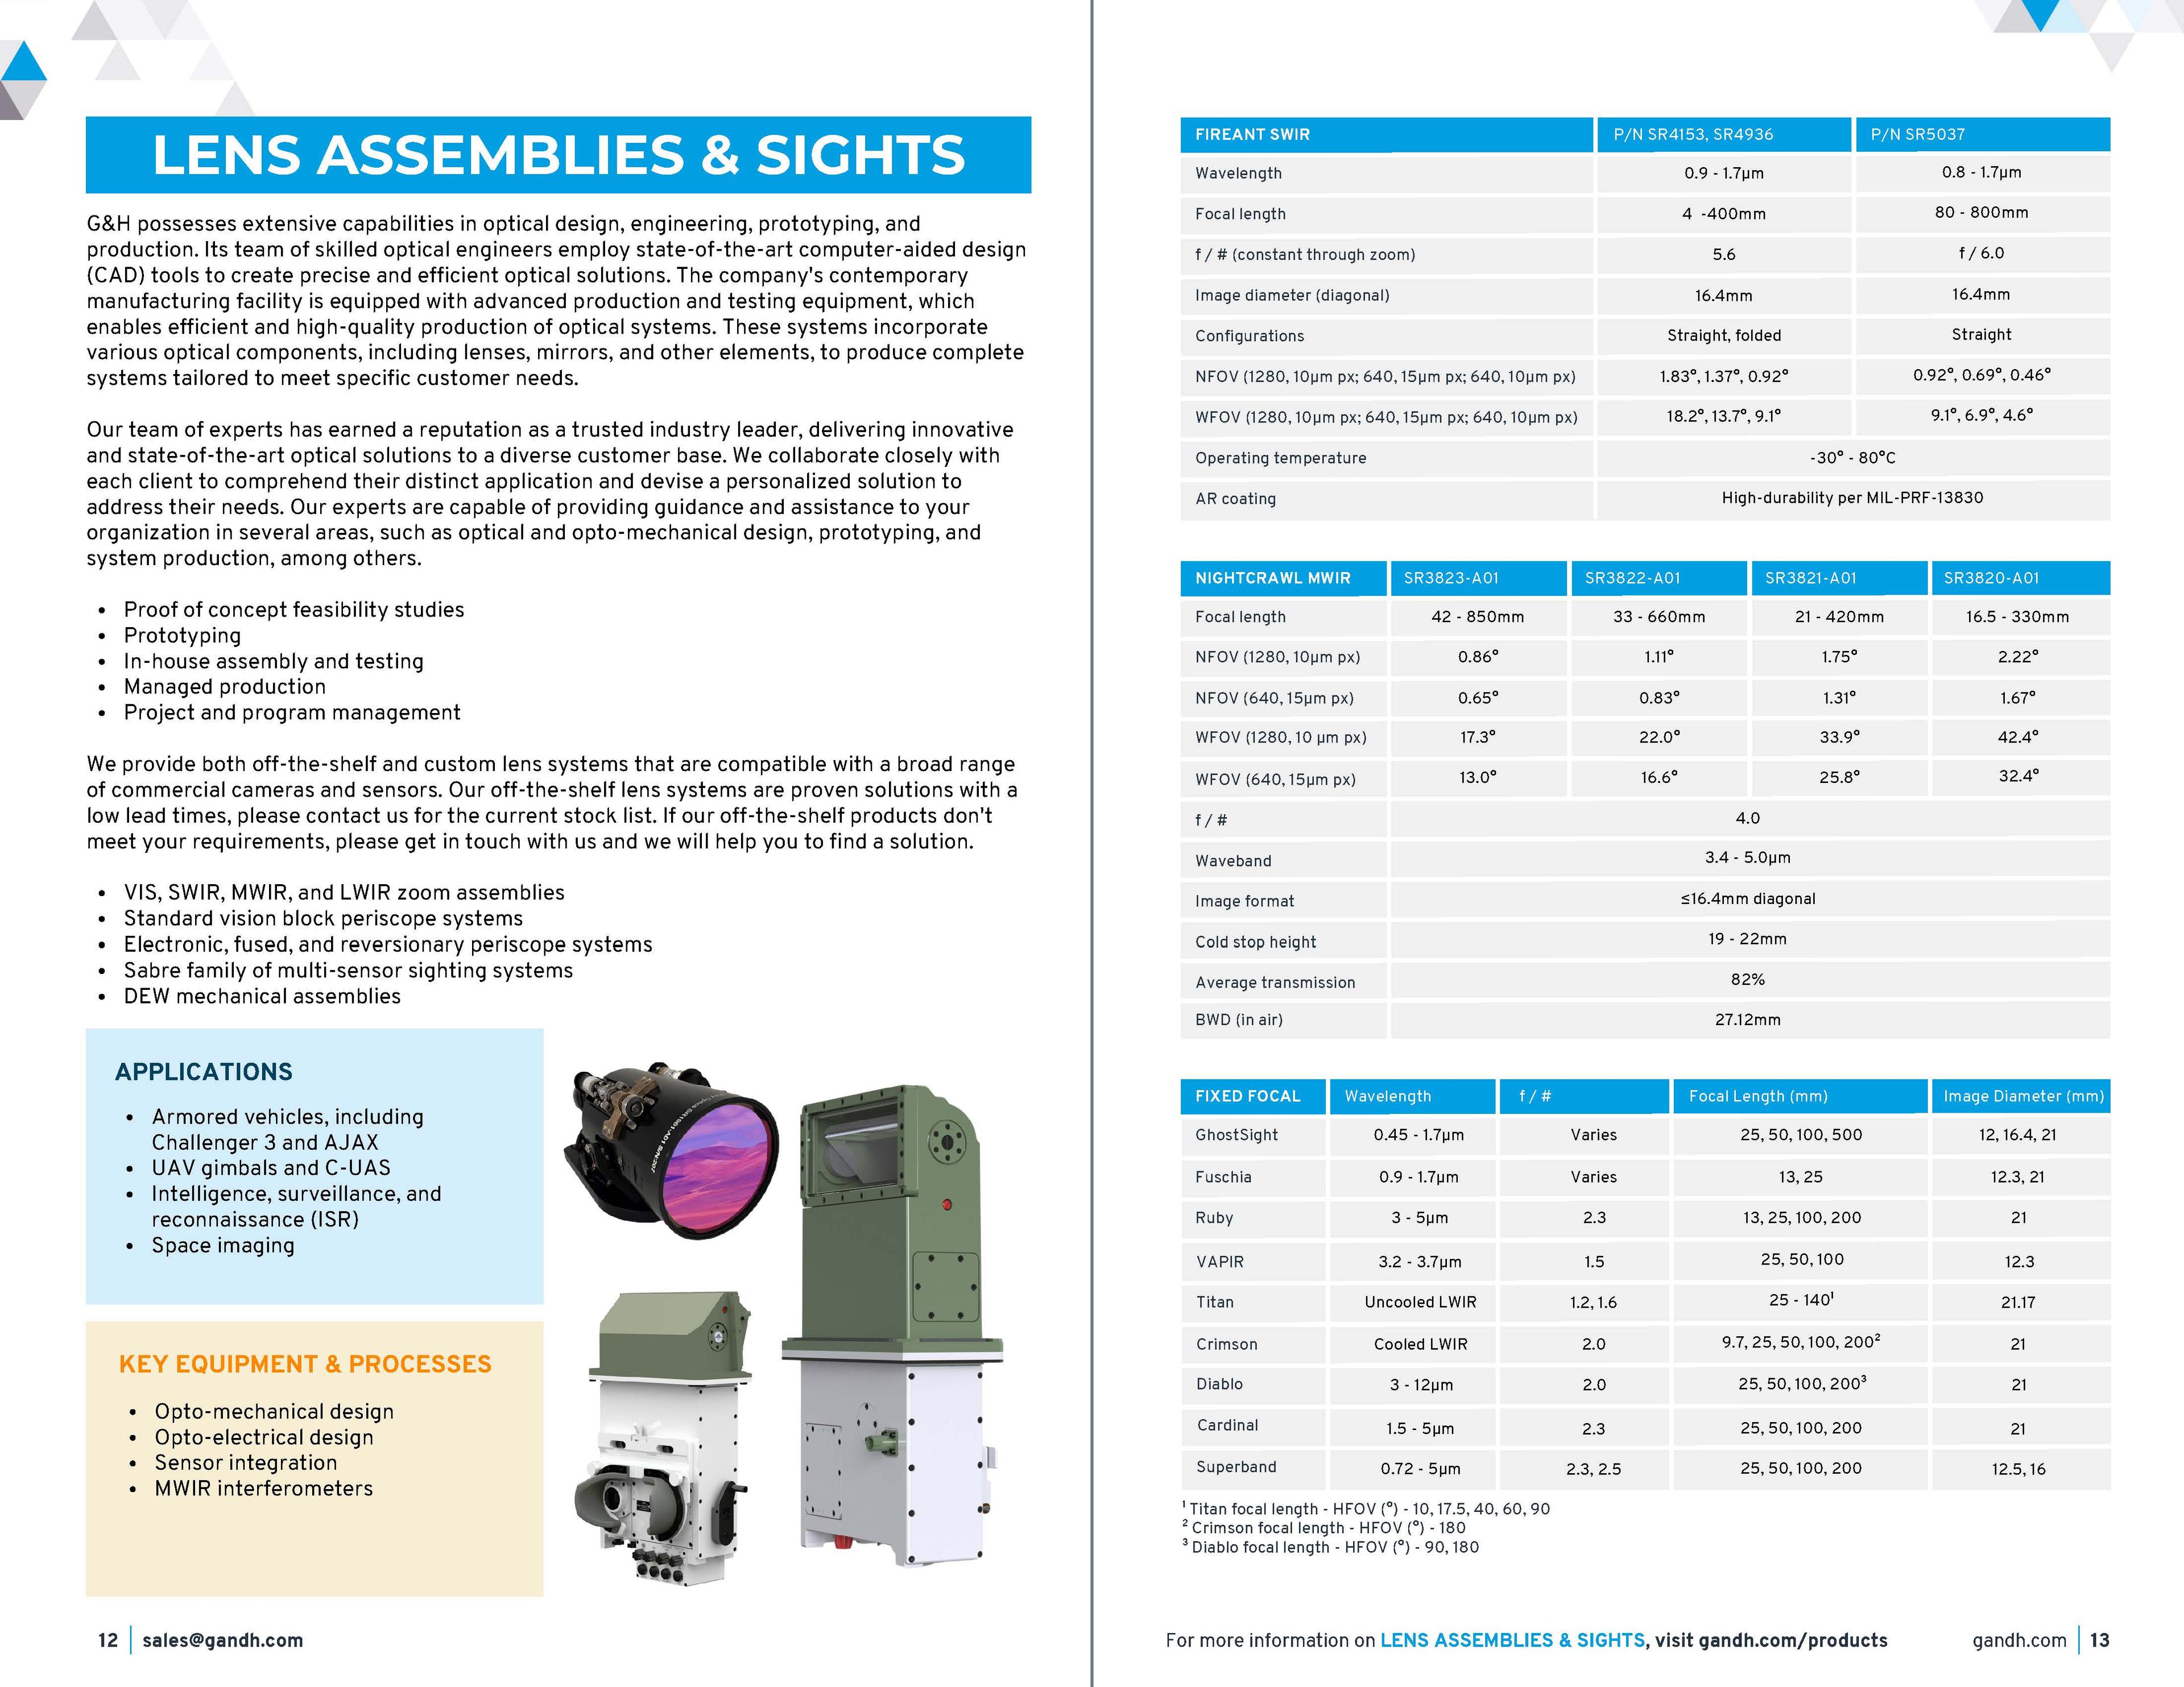 G&H Product & Solutions Guide - Precision Optics Page 12-13